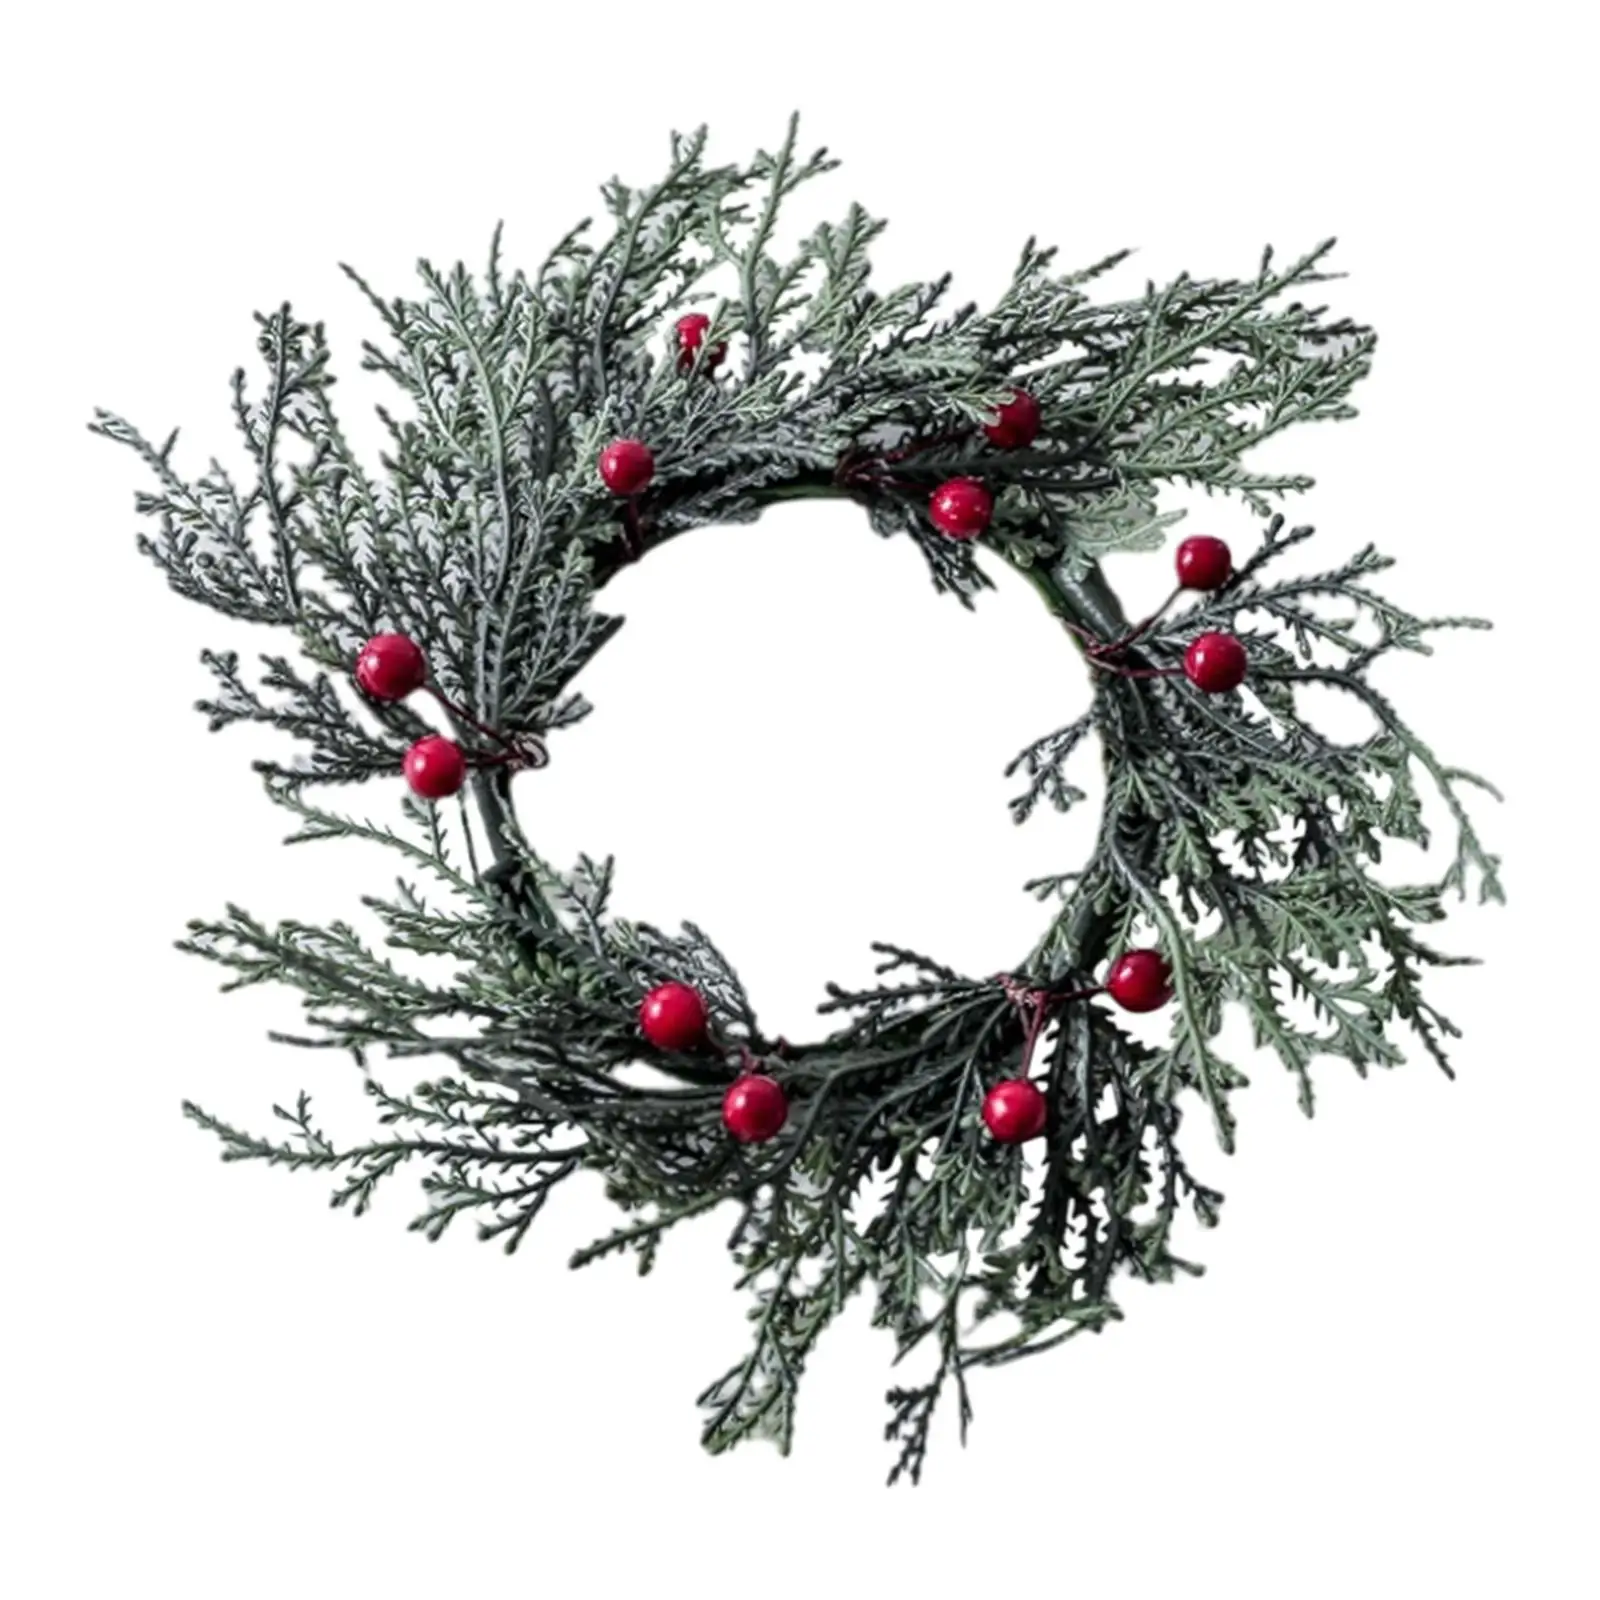 Christmas Candle Ring 8inch Simulation Berries Table Centerpiece for Holiday Rustic Wedding Front Door Lantern Home Decoration